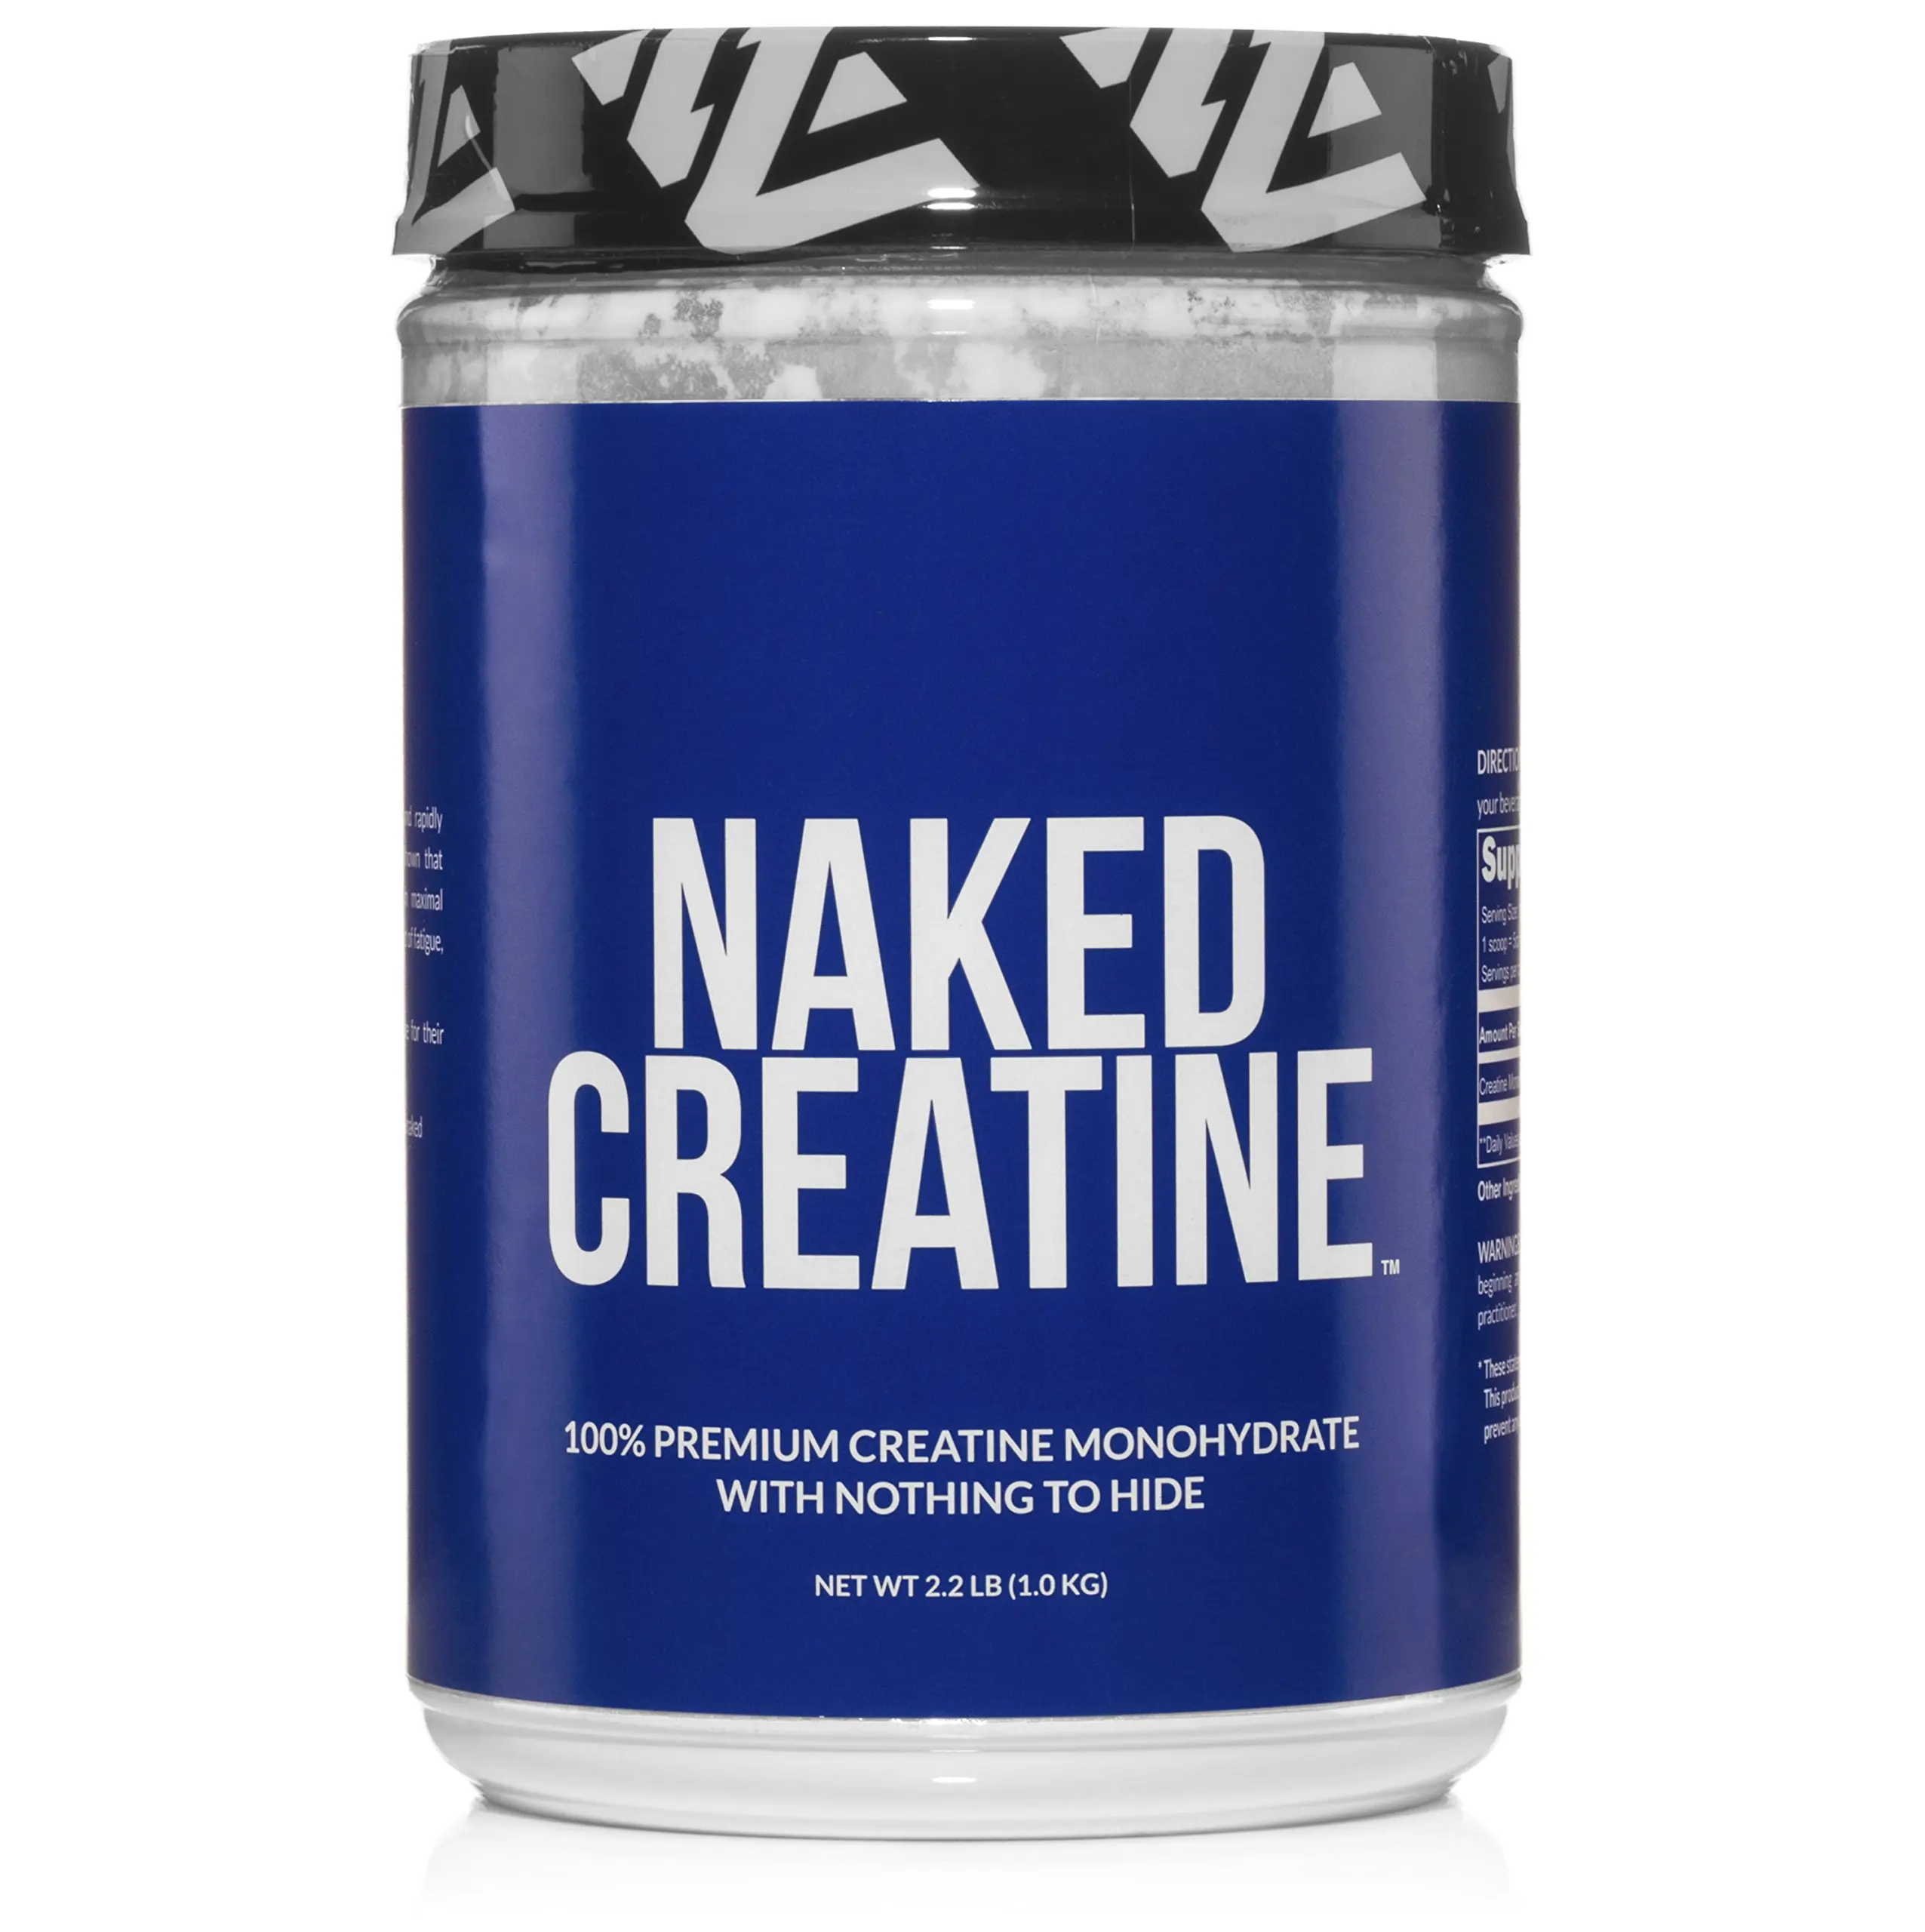 Naked creatine review tgr